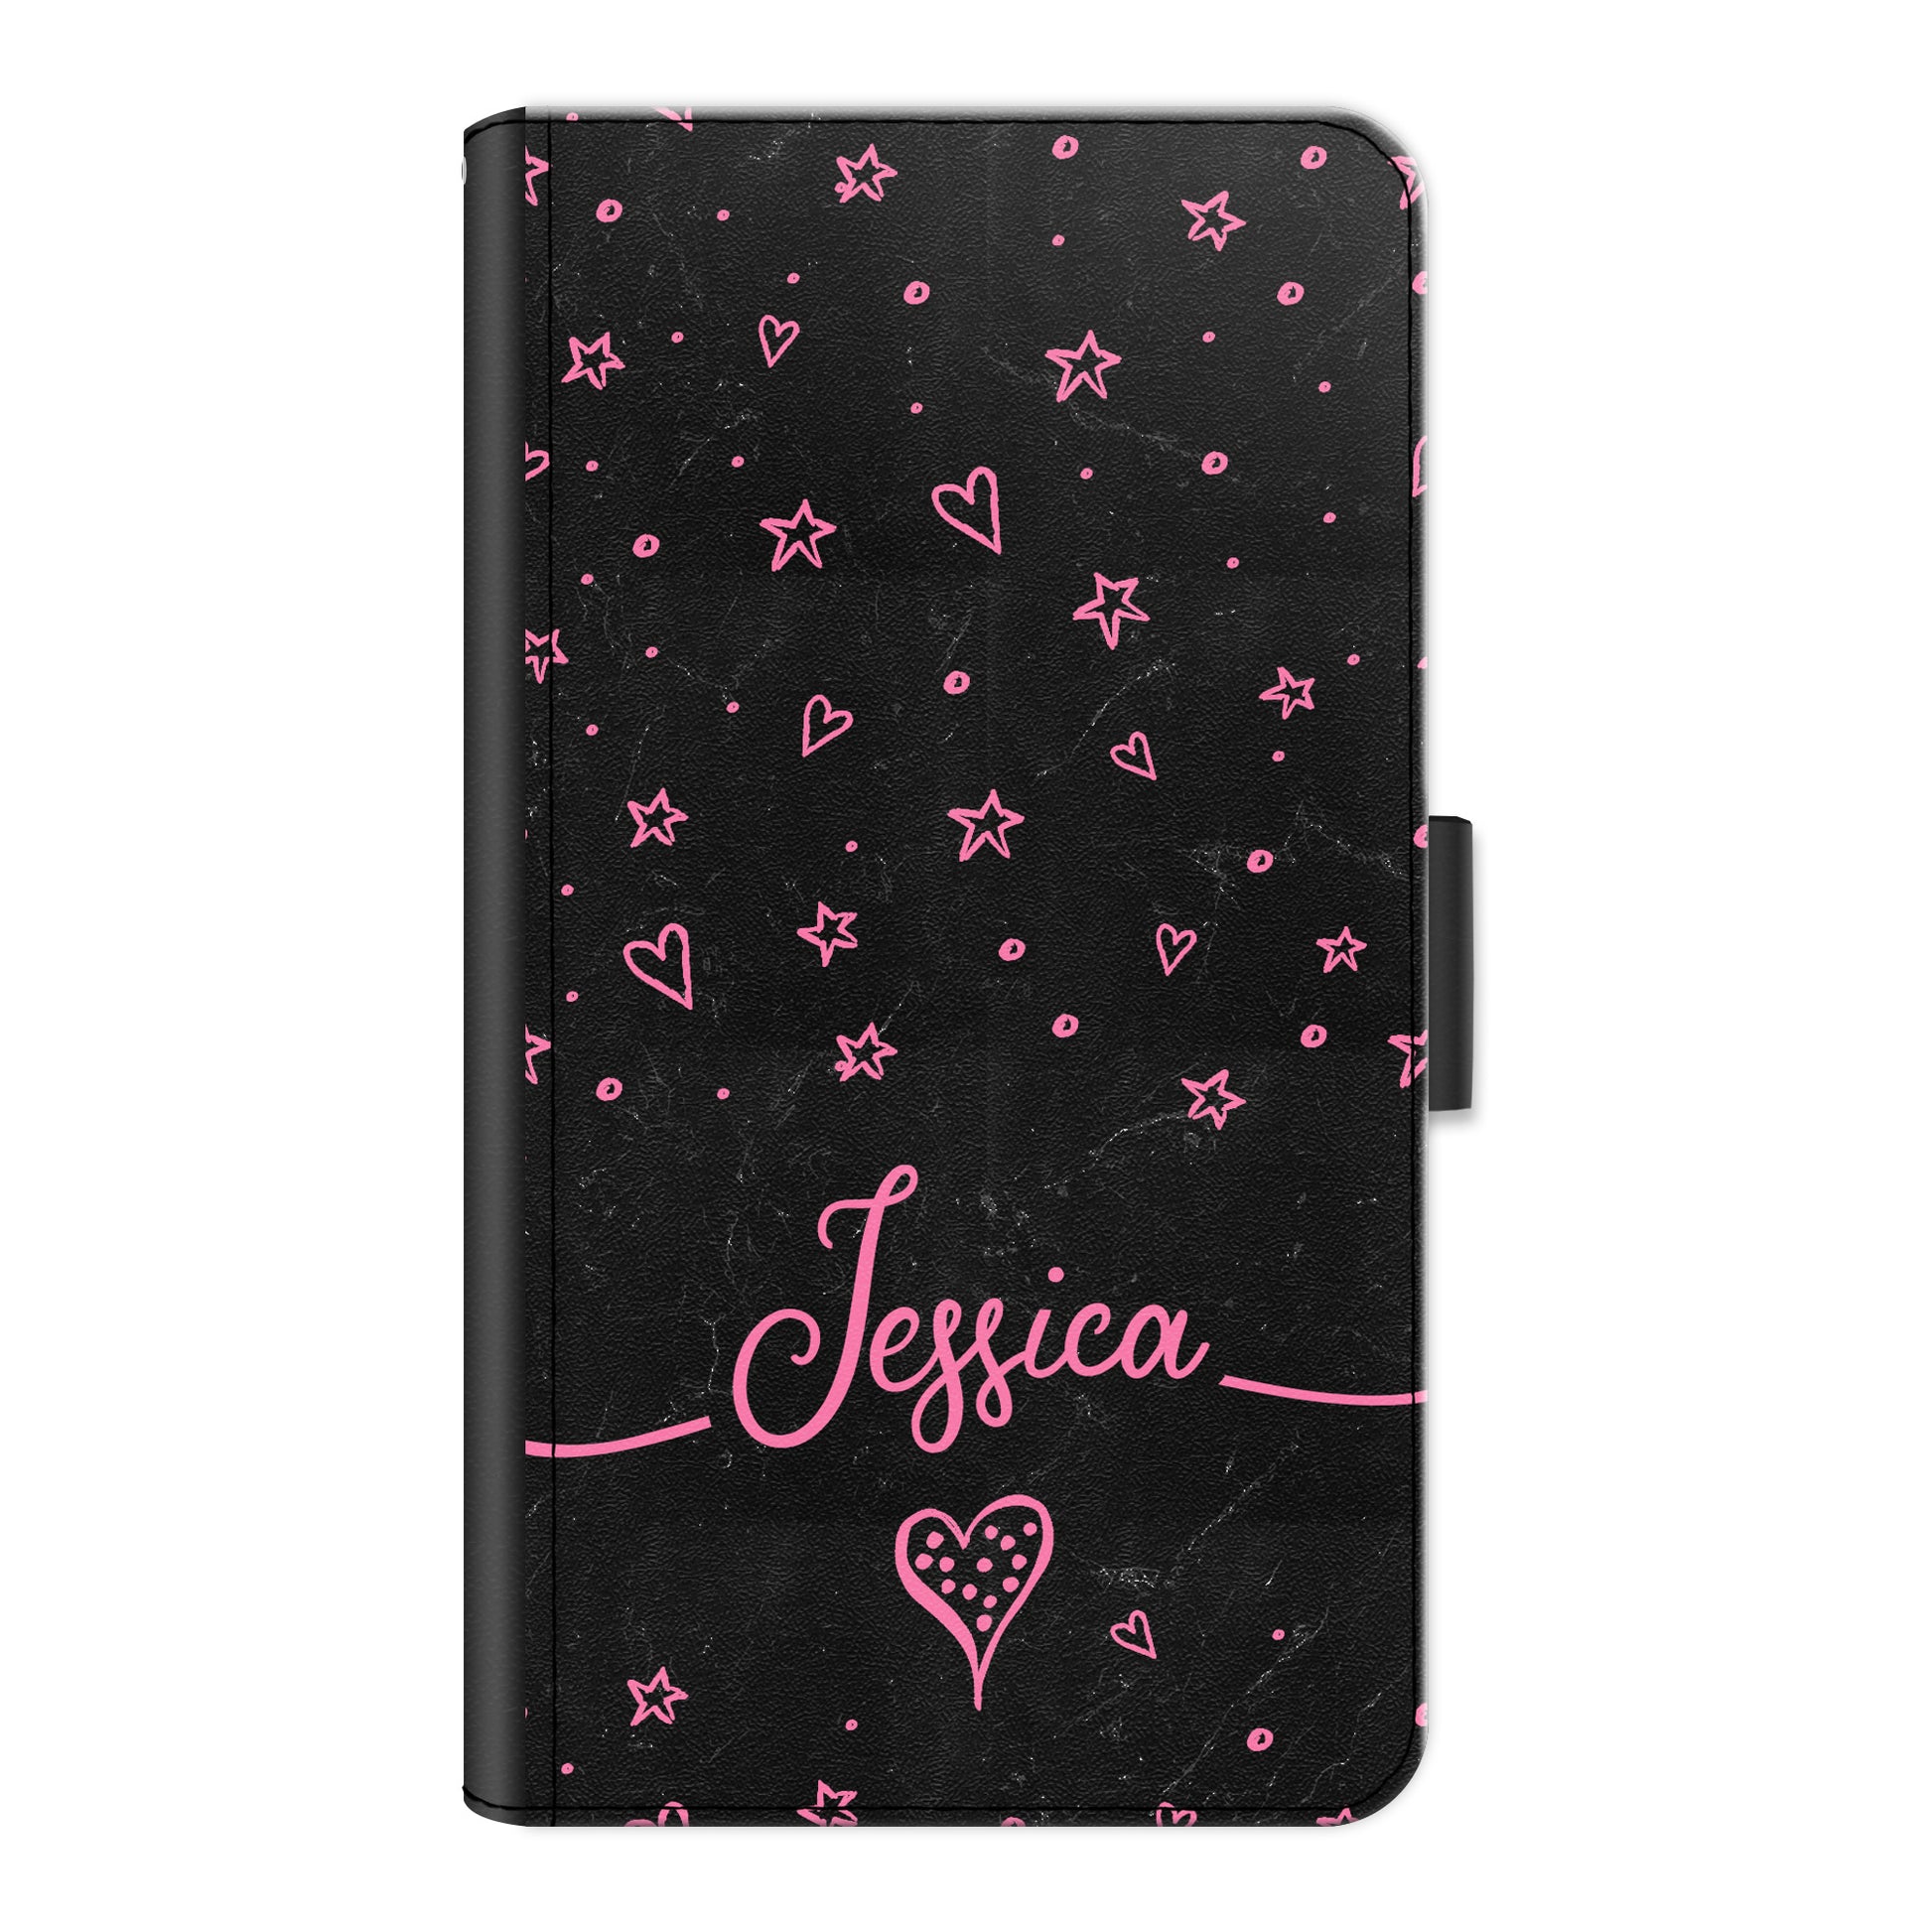 Personalised HTC Phone Leather Wallet with Pink Stylish text, Stars and Hearts on Black Marble